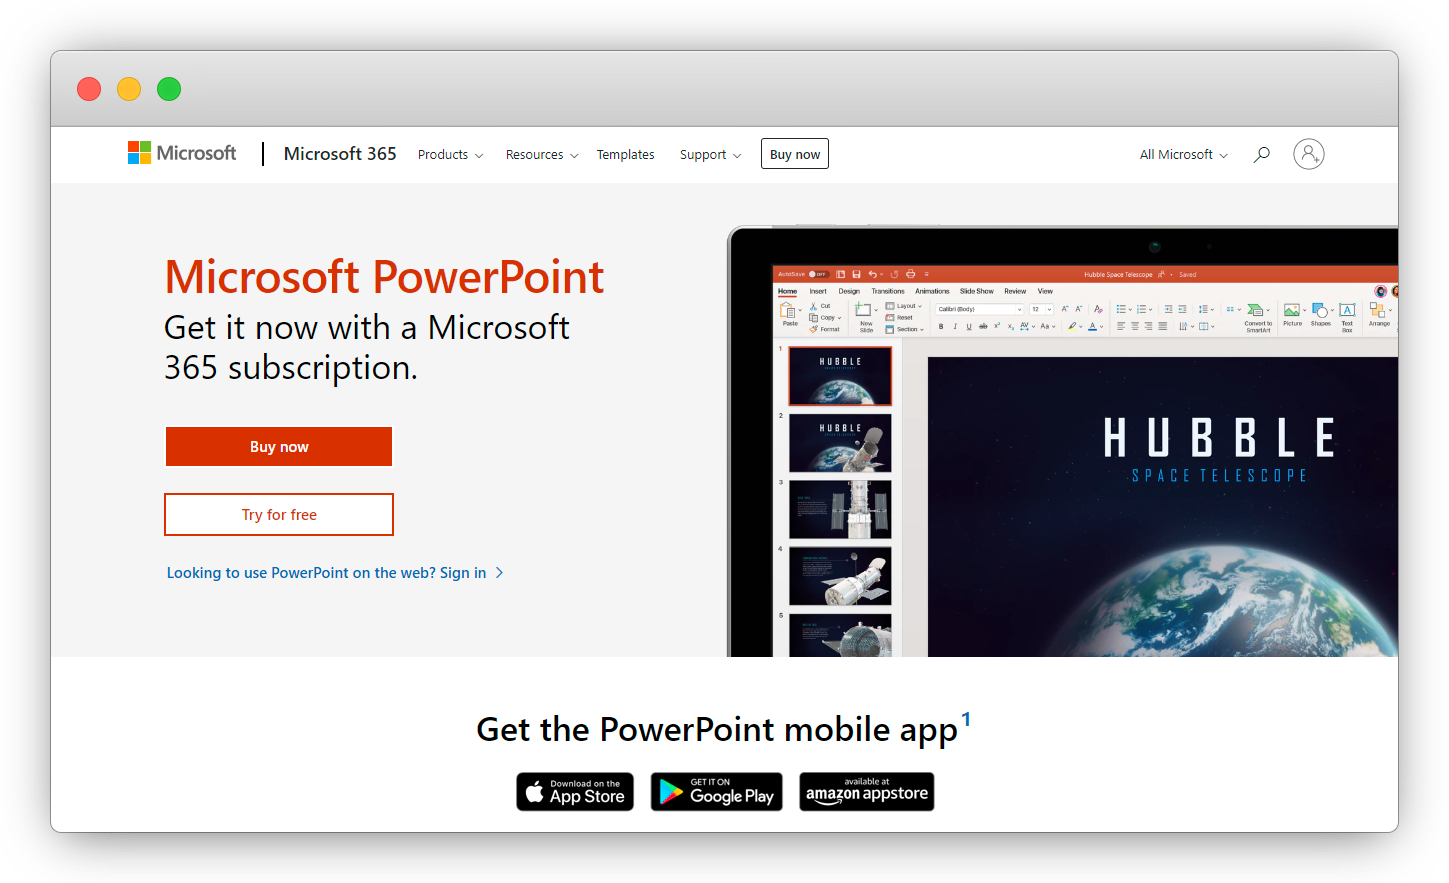 Microsoft PowerPoint Presentation and Product Management tool